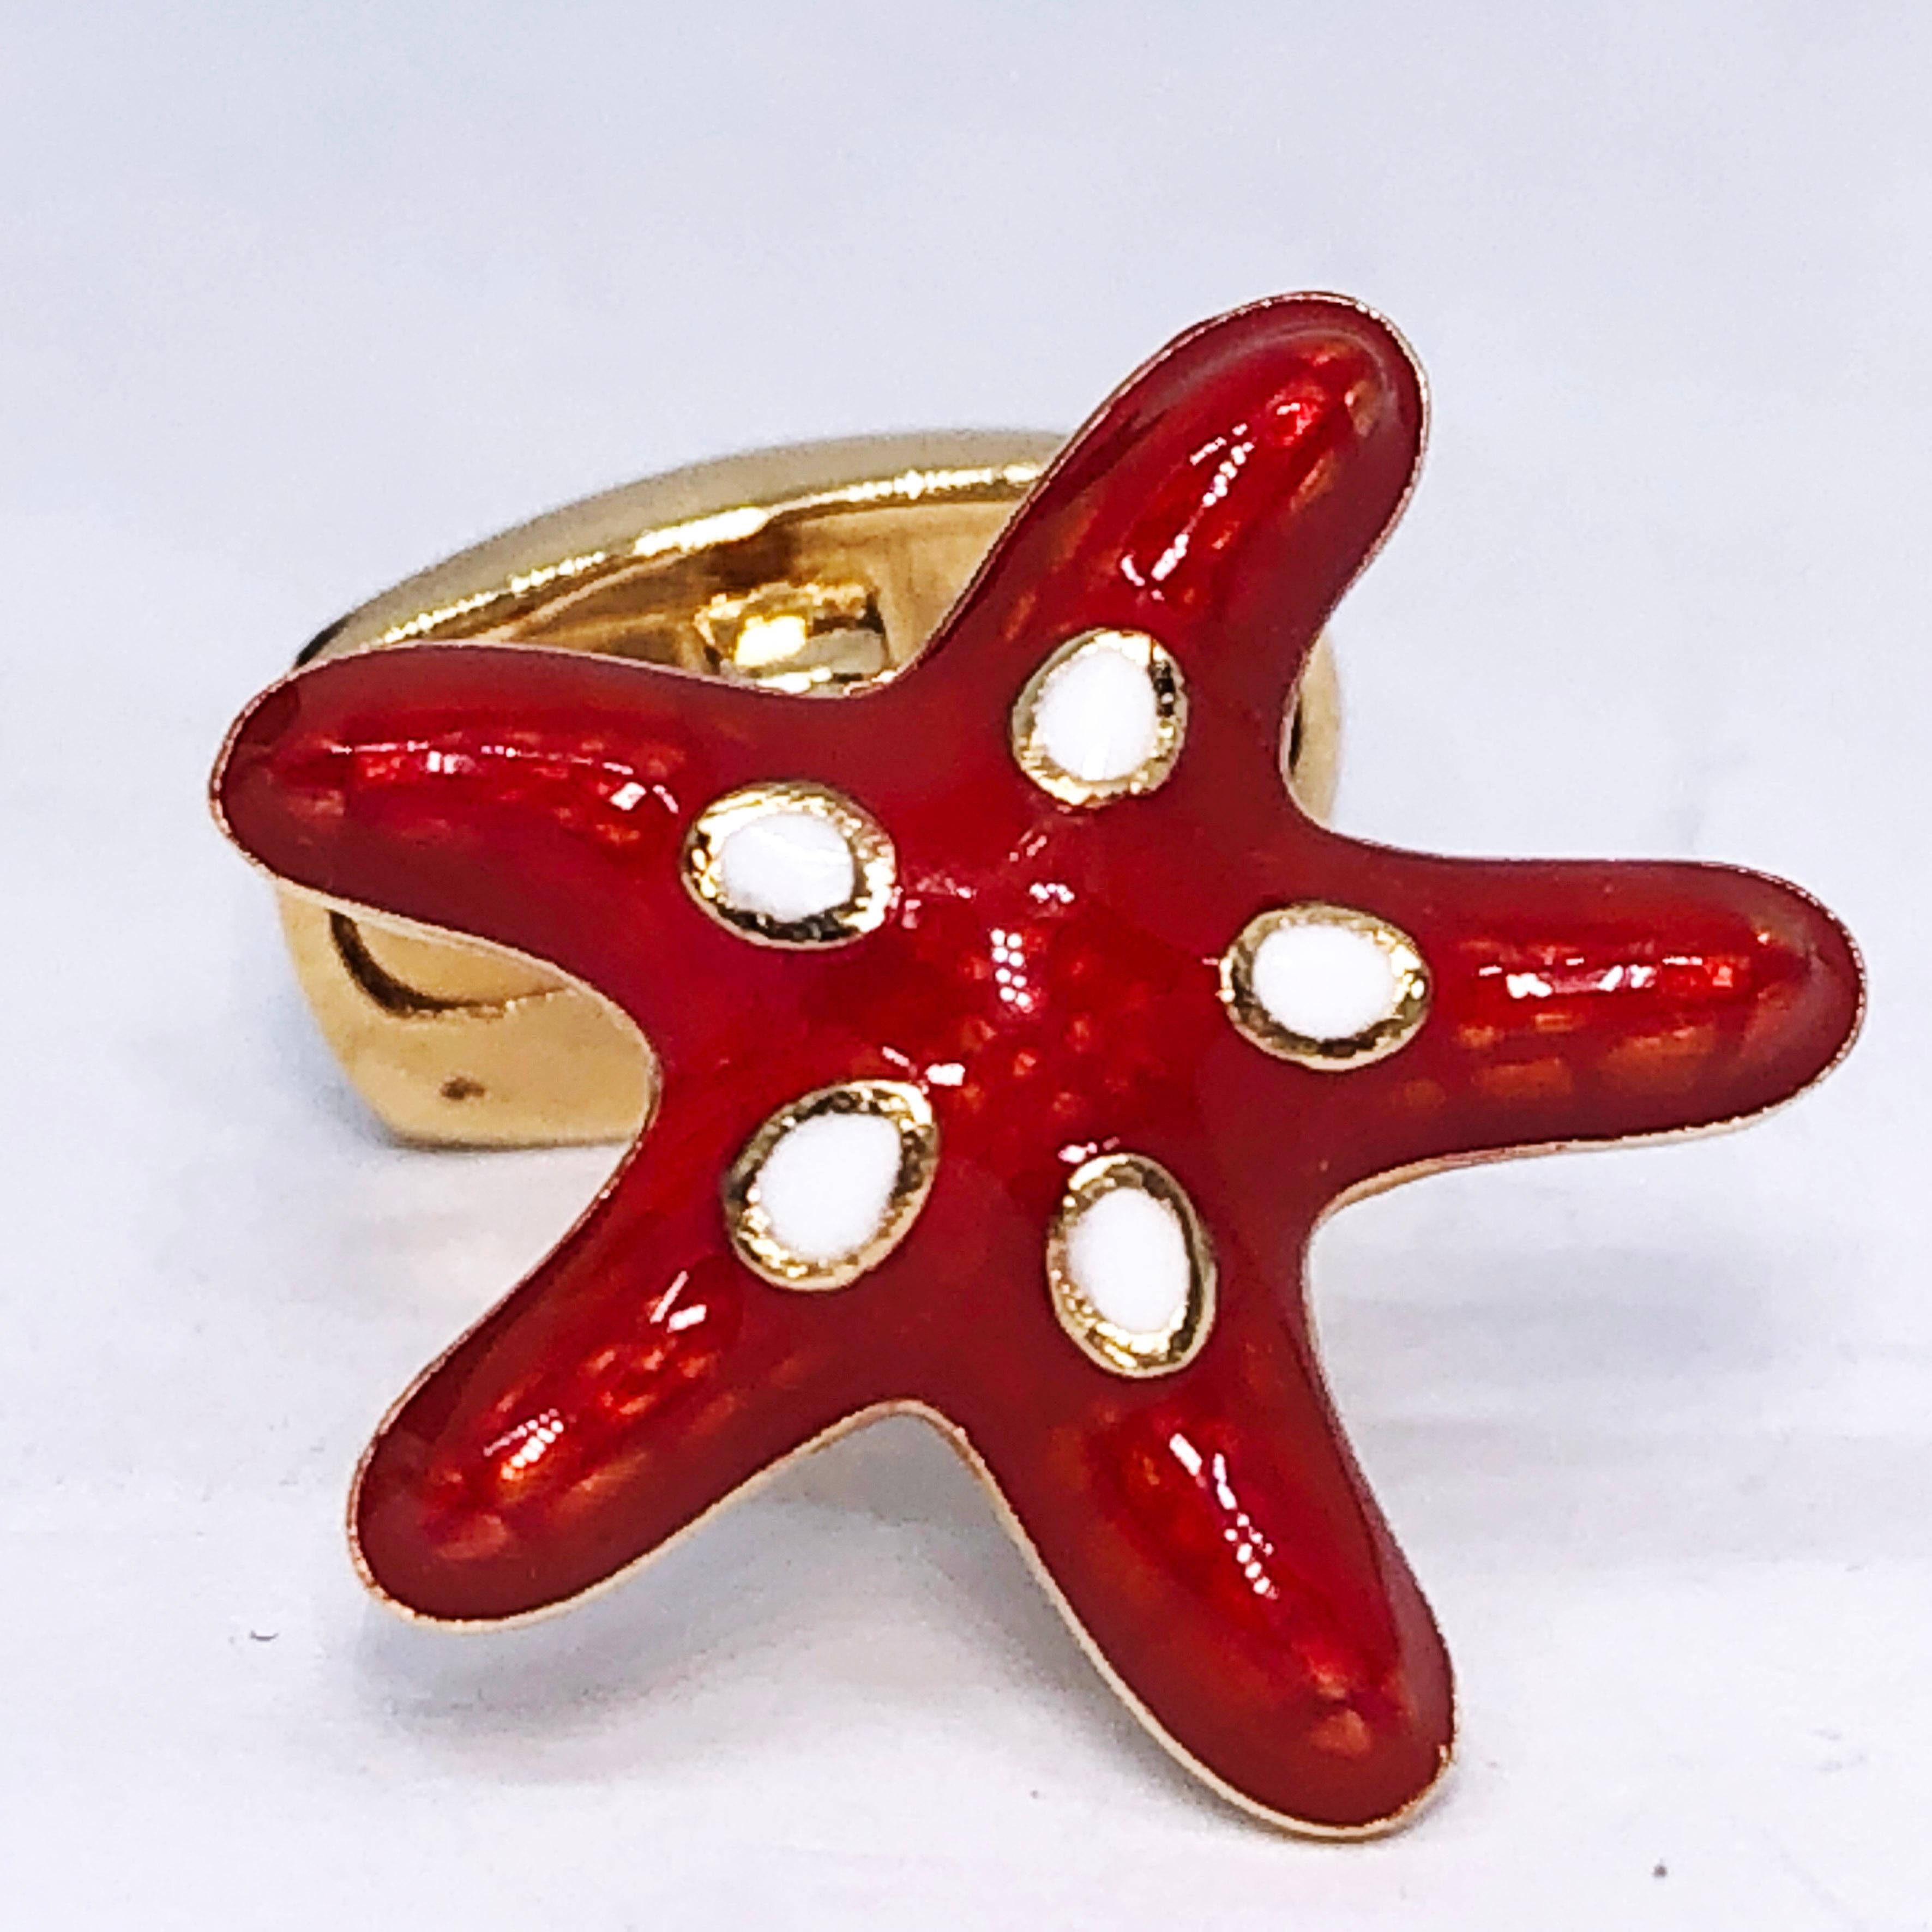 Unique and Chic Red and White Spotted Hand Enamelled Little Starfish Shaped T-Bar Back, Sterling Silver Gold-Plated Cufflinks.
In our smart black box.